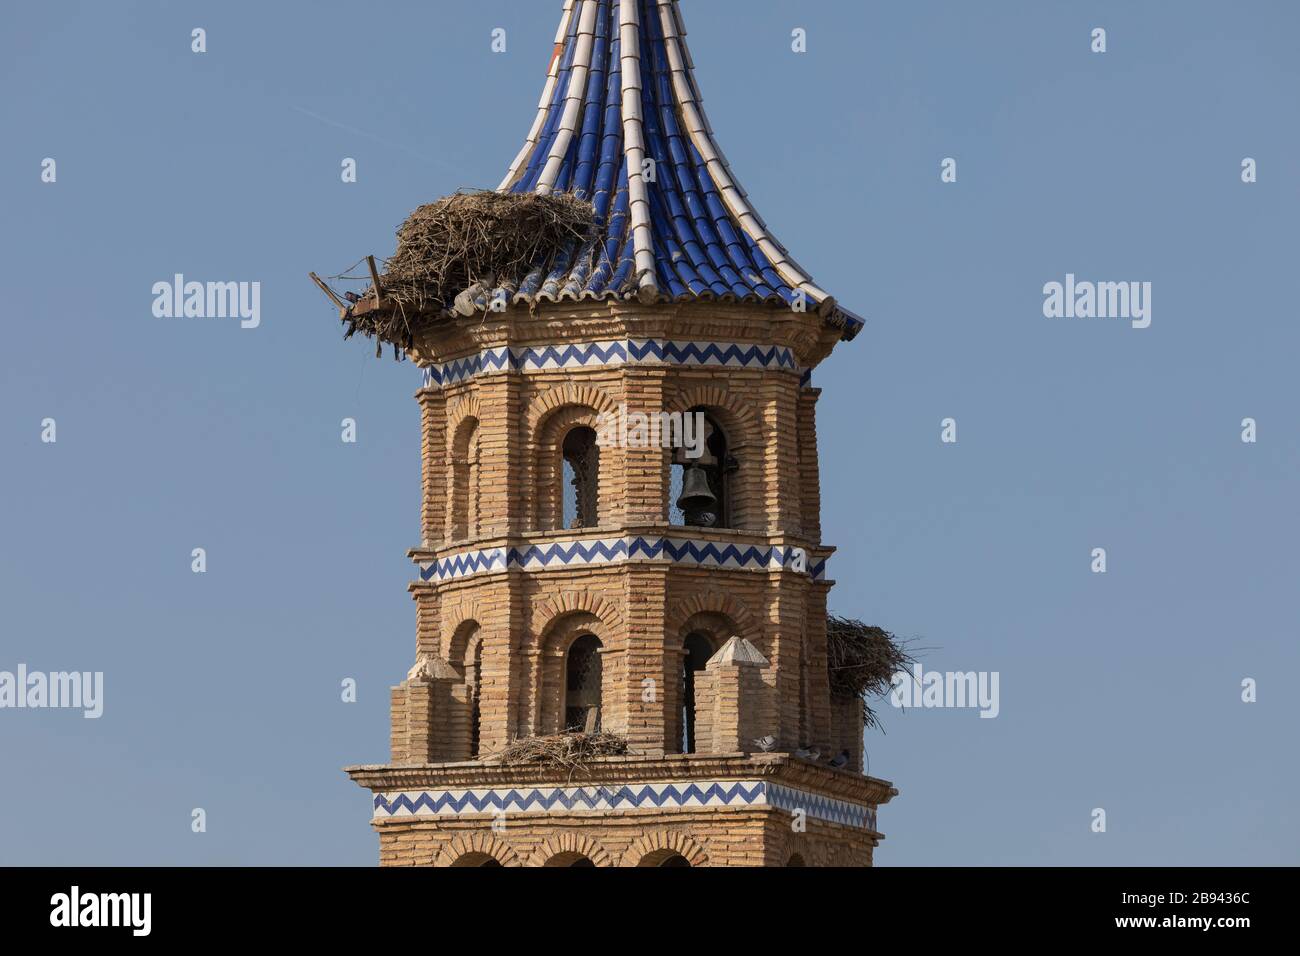 Close-up detail of the tower of the Church of San Antonio Abad de Tauste, in the Cinco Villas region, Aragon, Spain. Stock Photo